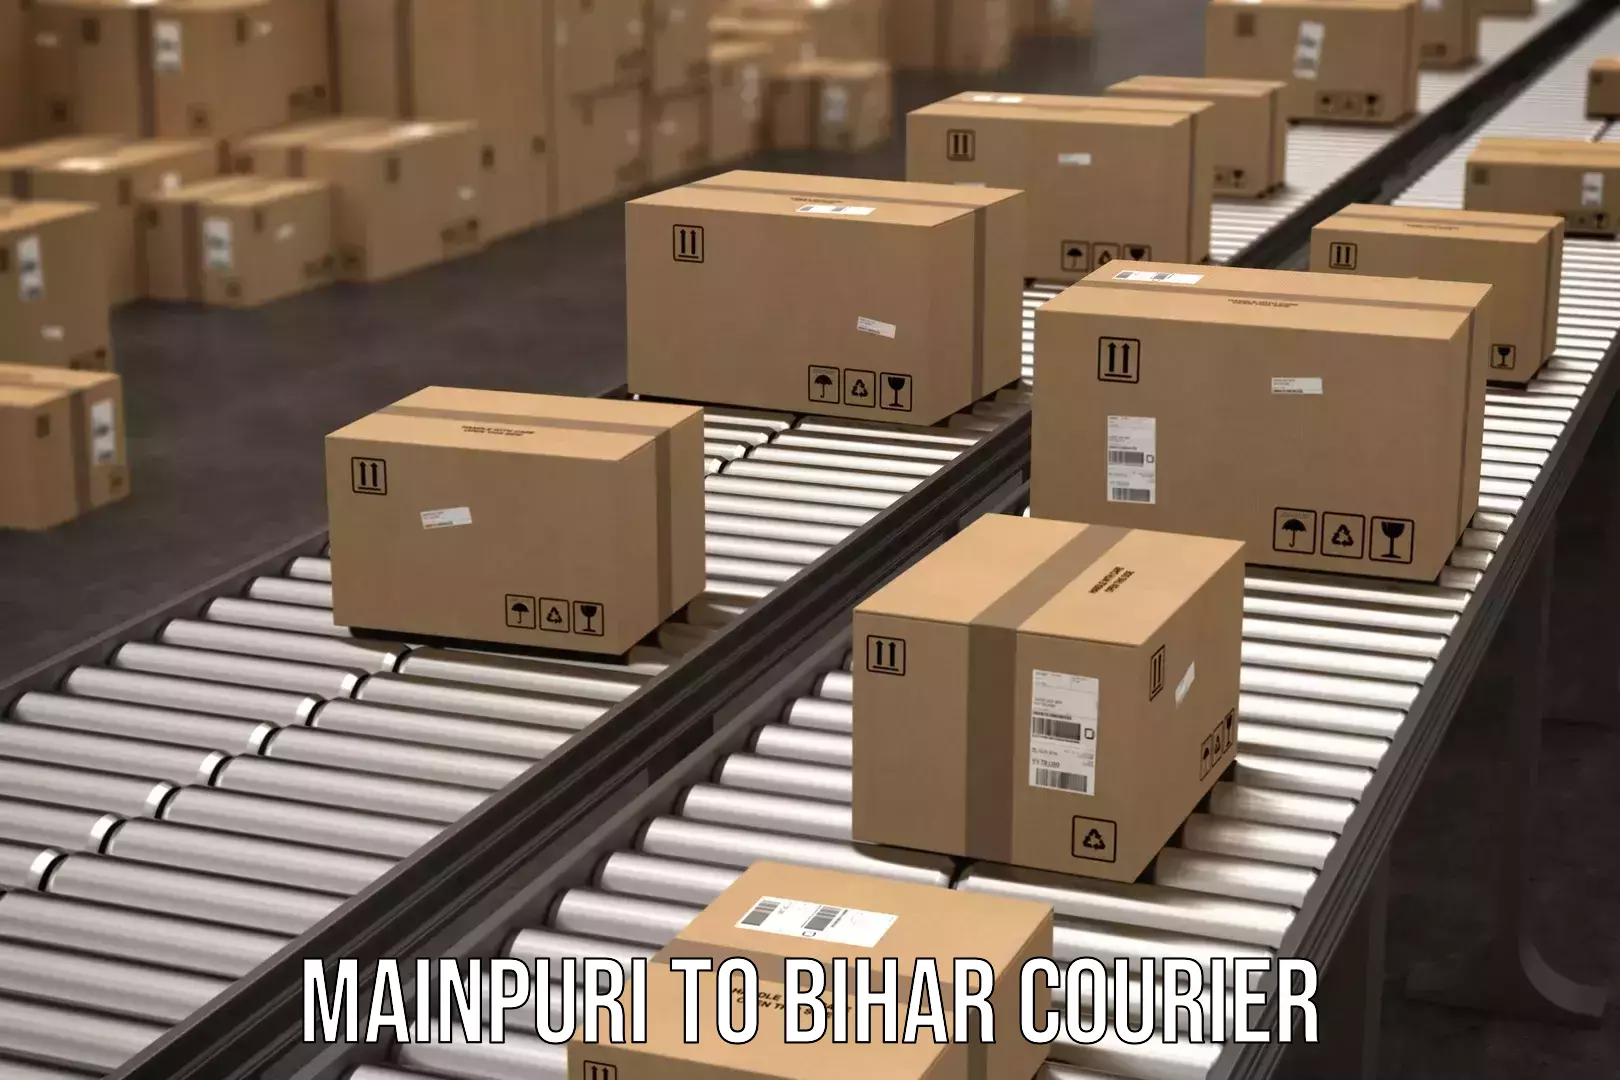 Overnight delivery services Mainpuri to Bihar